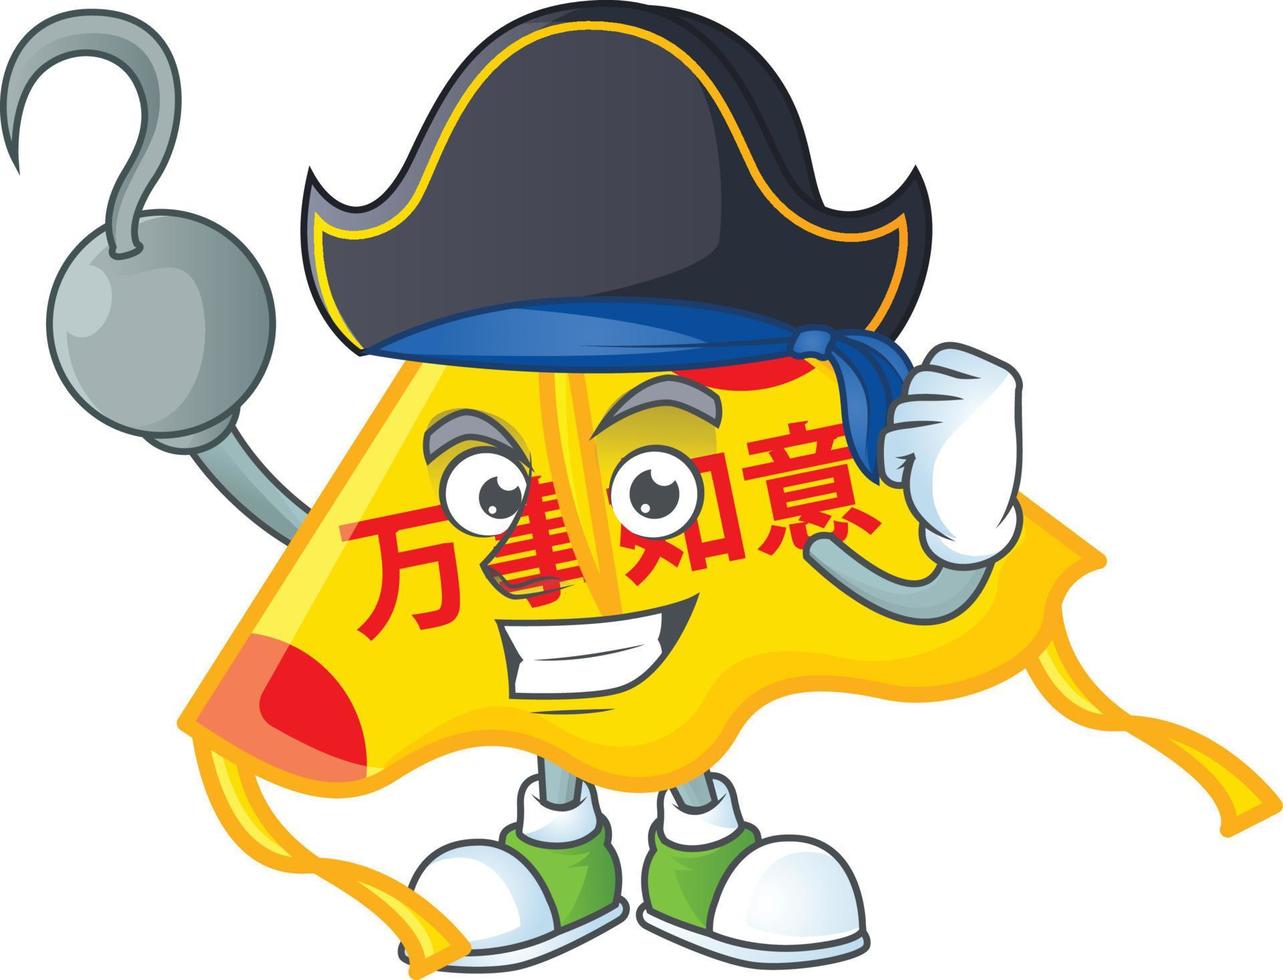 Chinese gold kite cartoon character style vector